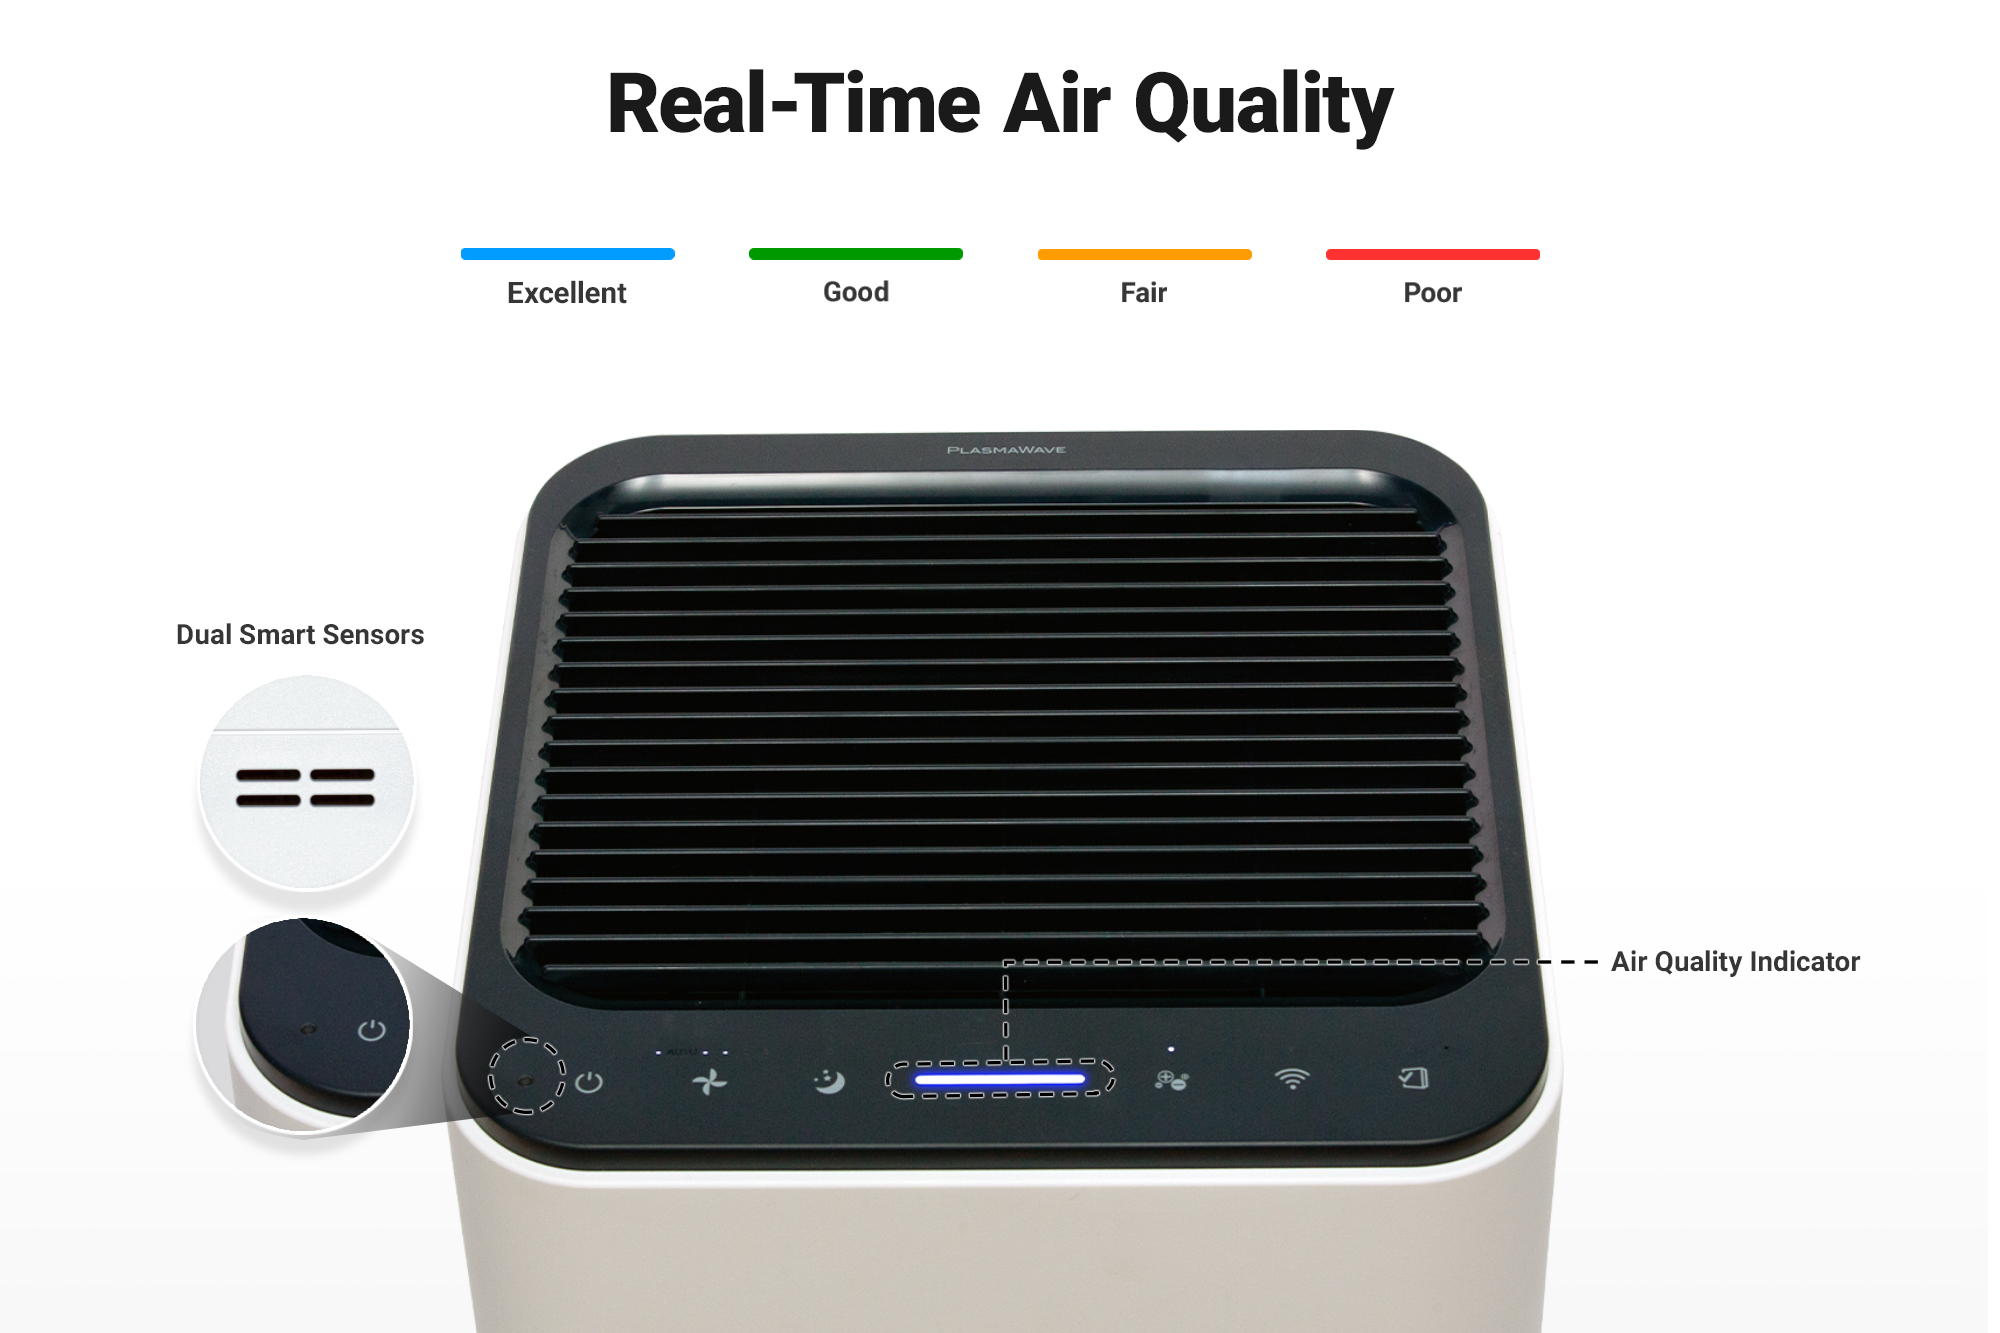 XLC Air Purifier with Smart Sensors and Air Quality Indicator